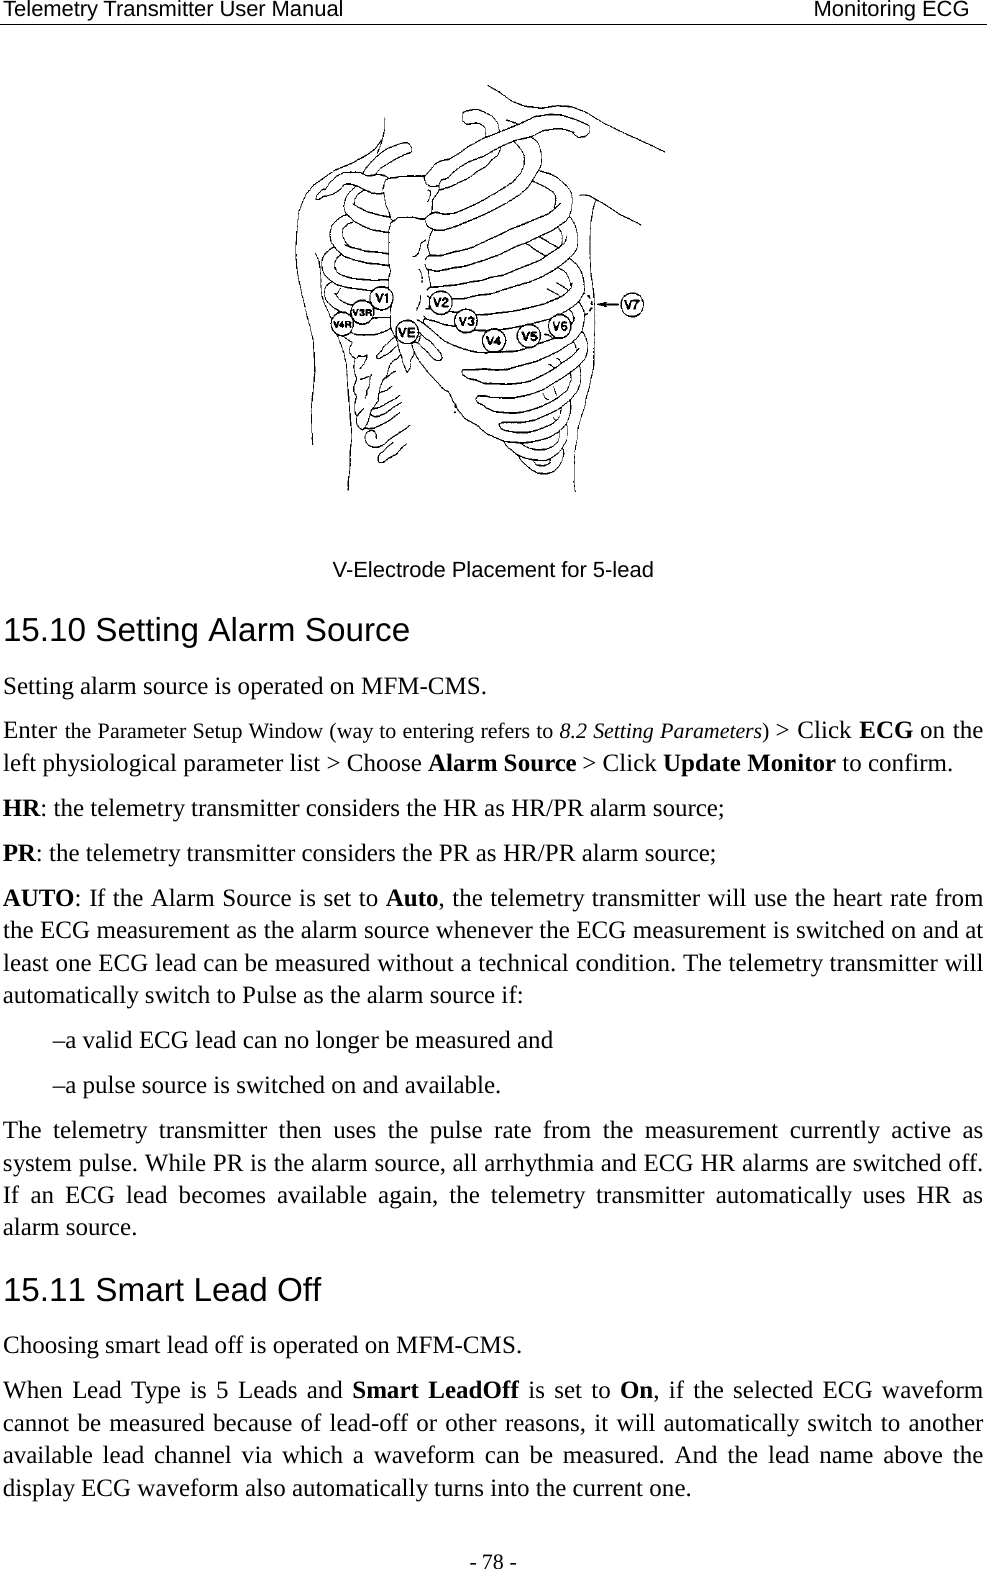 Telemetry Transmitter User Manual                                           Monitoring ECG  V-Electrode Placement for 5-lead   15.10 Setting Alarm Source Setting alarm source is operated on MFM-CMS.   Enter the Parameter Setup Window (way to entering refers to 8.2 Setting Parameters) &gt; Click ECG on the left physiological parameter list &gt; Choose Alarm Source &gt; Click Update Monitor to confirm. HR: the telemetry transmitter considers the HR as HR/PR alarm source; PR: the telemetry transmitter considers the PR as HR/PR alarm source; AUTO: If the Alarm Source is set to Auto, the telemetry transmitter will use the heart rate from the ECG measurement as the alarm source whenever the ECG measurement is switched on and at least one ECG lead can be measured without a technical condition. The telemetry transmitter will automatically switch to Pulse as the alarm source if: –a valid ECG lead can no longer be measured and   –a pulse source is switched on and available. The  telemetry transmitter then uses the pulse rate from the measurement currently active as system pulse. While PR is the alarm source, all arrhythmia and ECG HR alarms are switched off. If an ECG lead becomes available again, the telemetry transmitter automatically uses HR as alarm source. 15.11 Smart Lead Off Choosing smart lead off is operated on MFM-CMS.   When Lead Type is 5 Leads and Smart LeadOff is set to On, if the selected ECG waveform cannot be measured because of lead-off or other reasons, it will automatically switch to another available lead channel via which a waveform can be measured. And the lead name above the display ECG waveform also automatically turns into the current one. - 78 - 